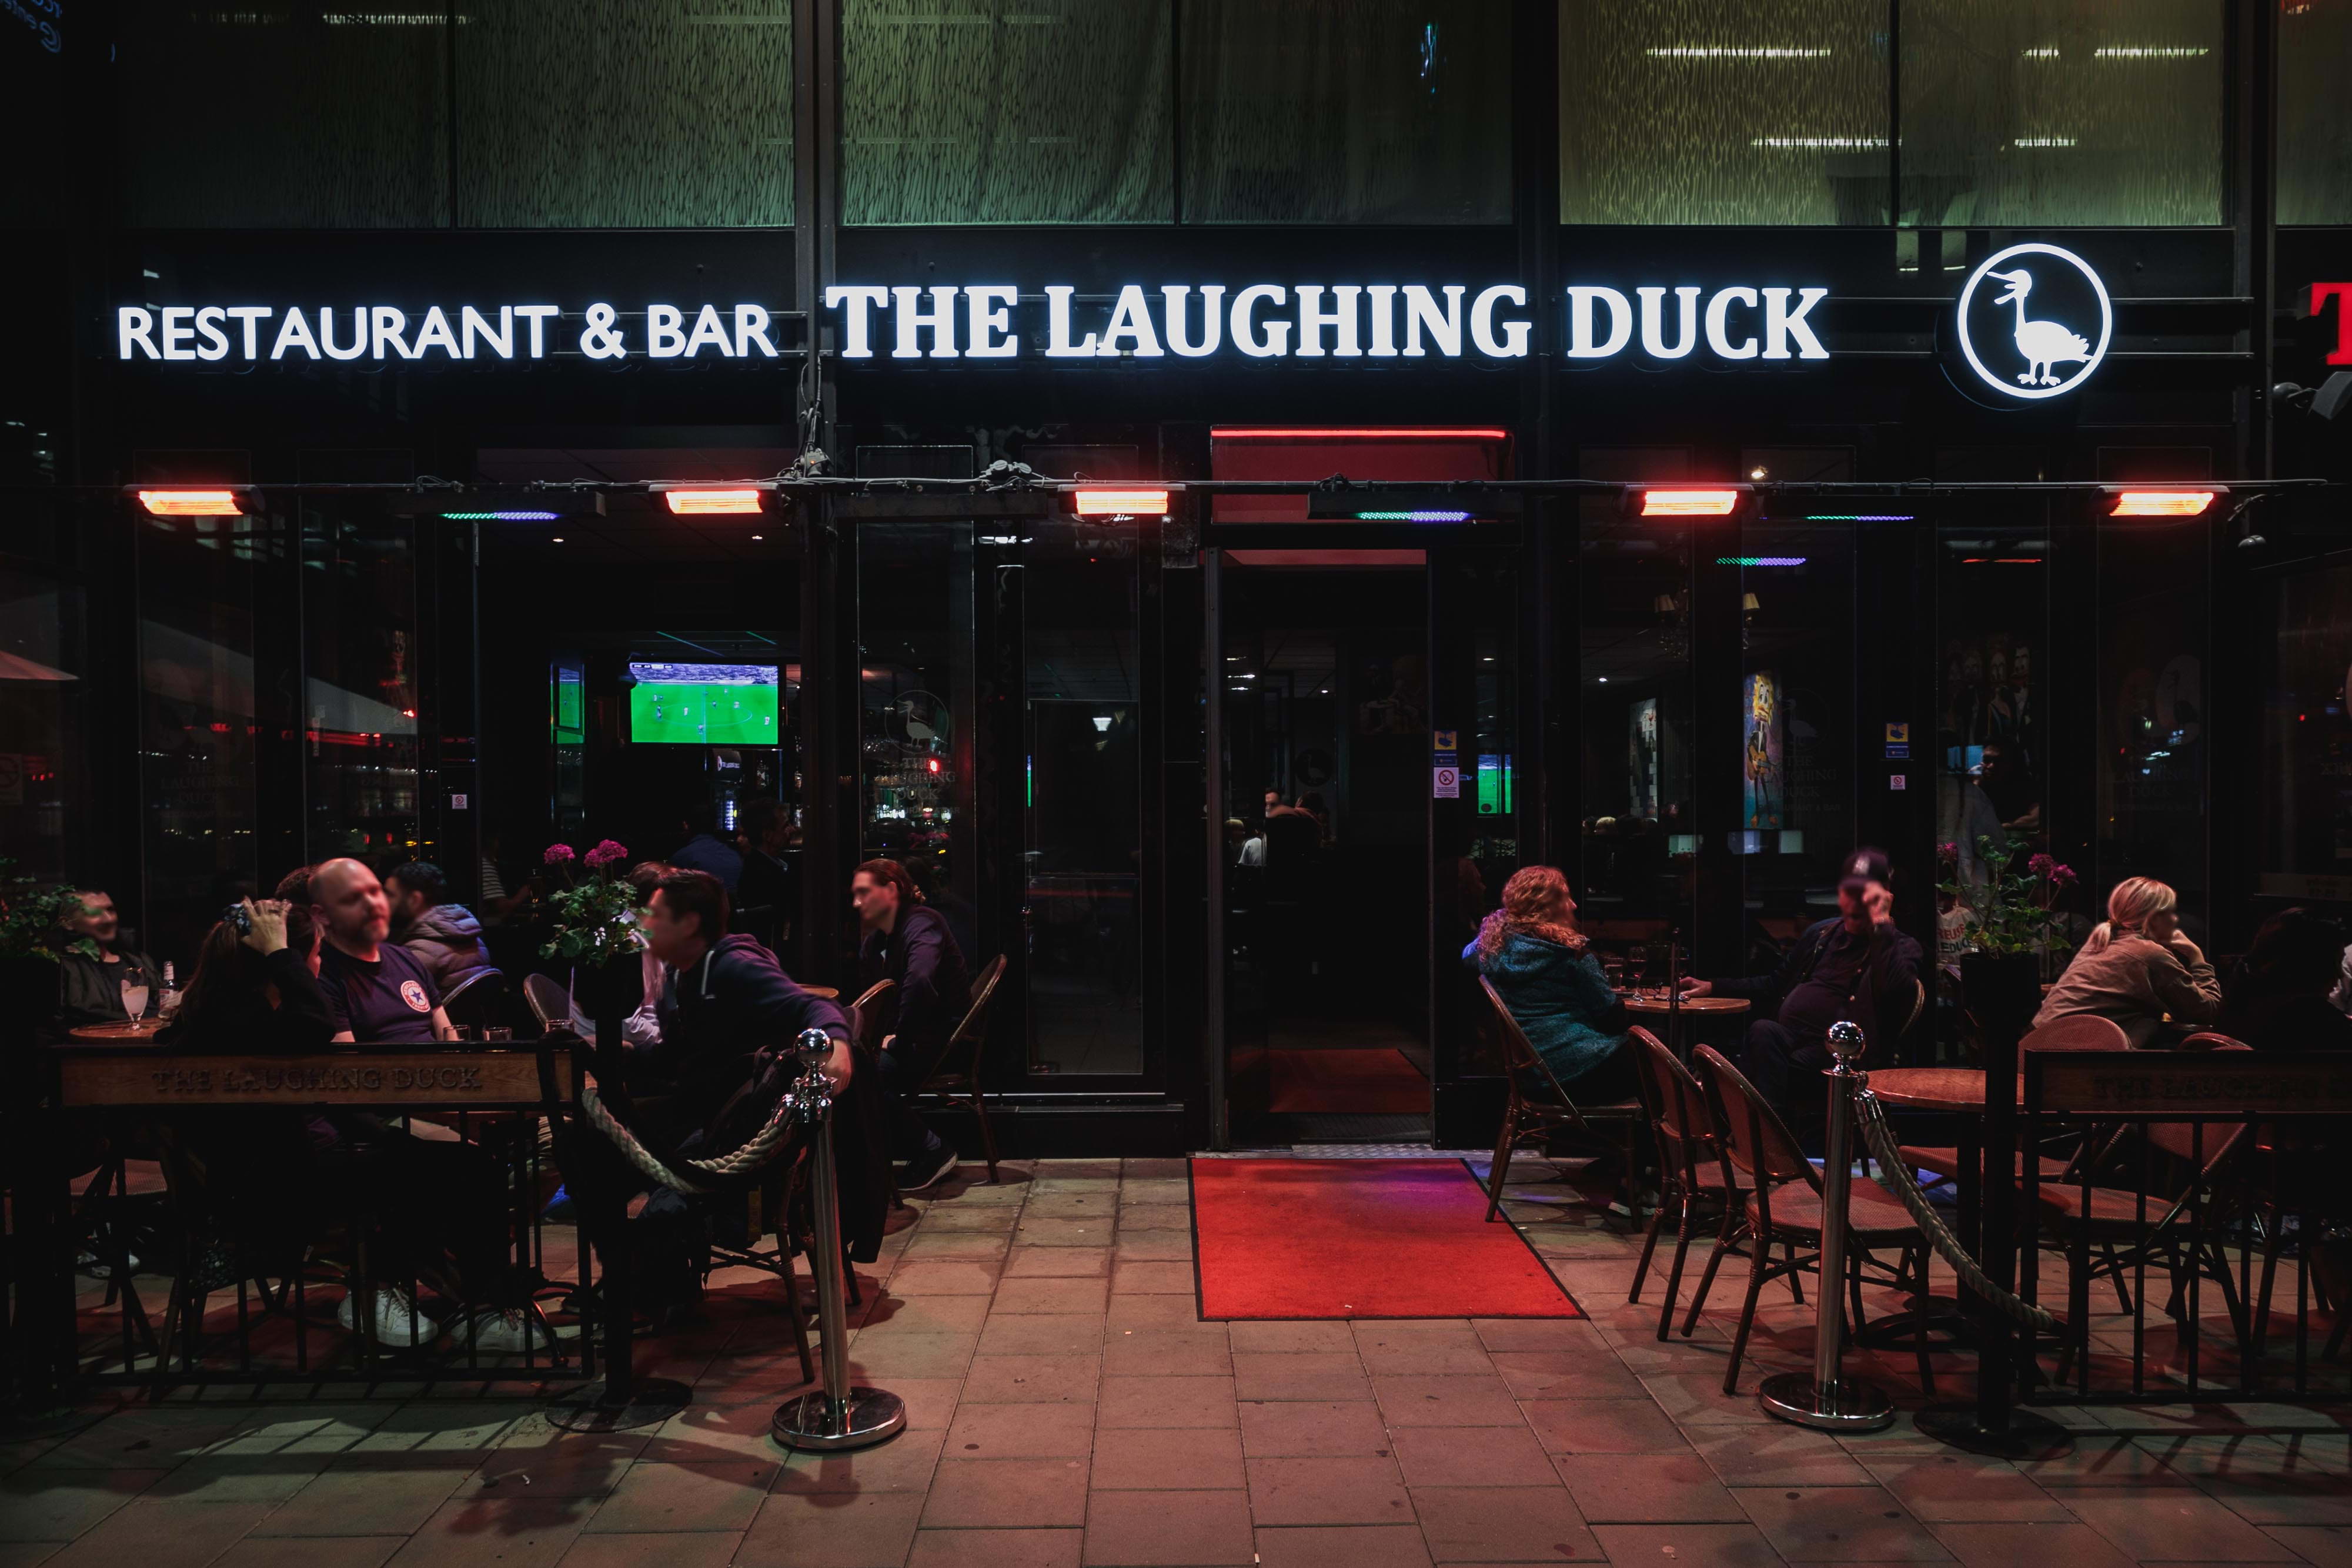 The Laughing Duck